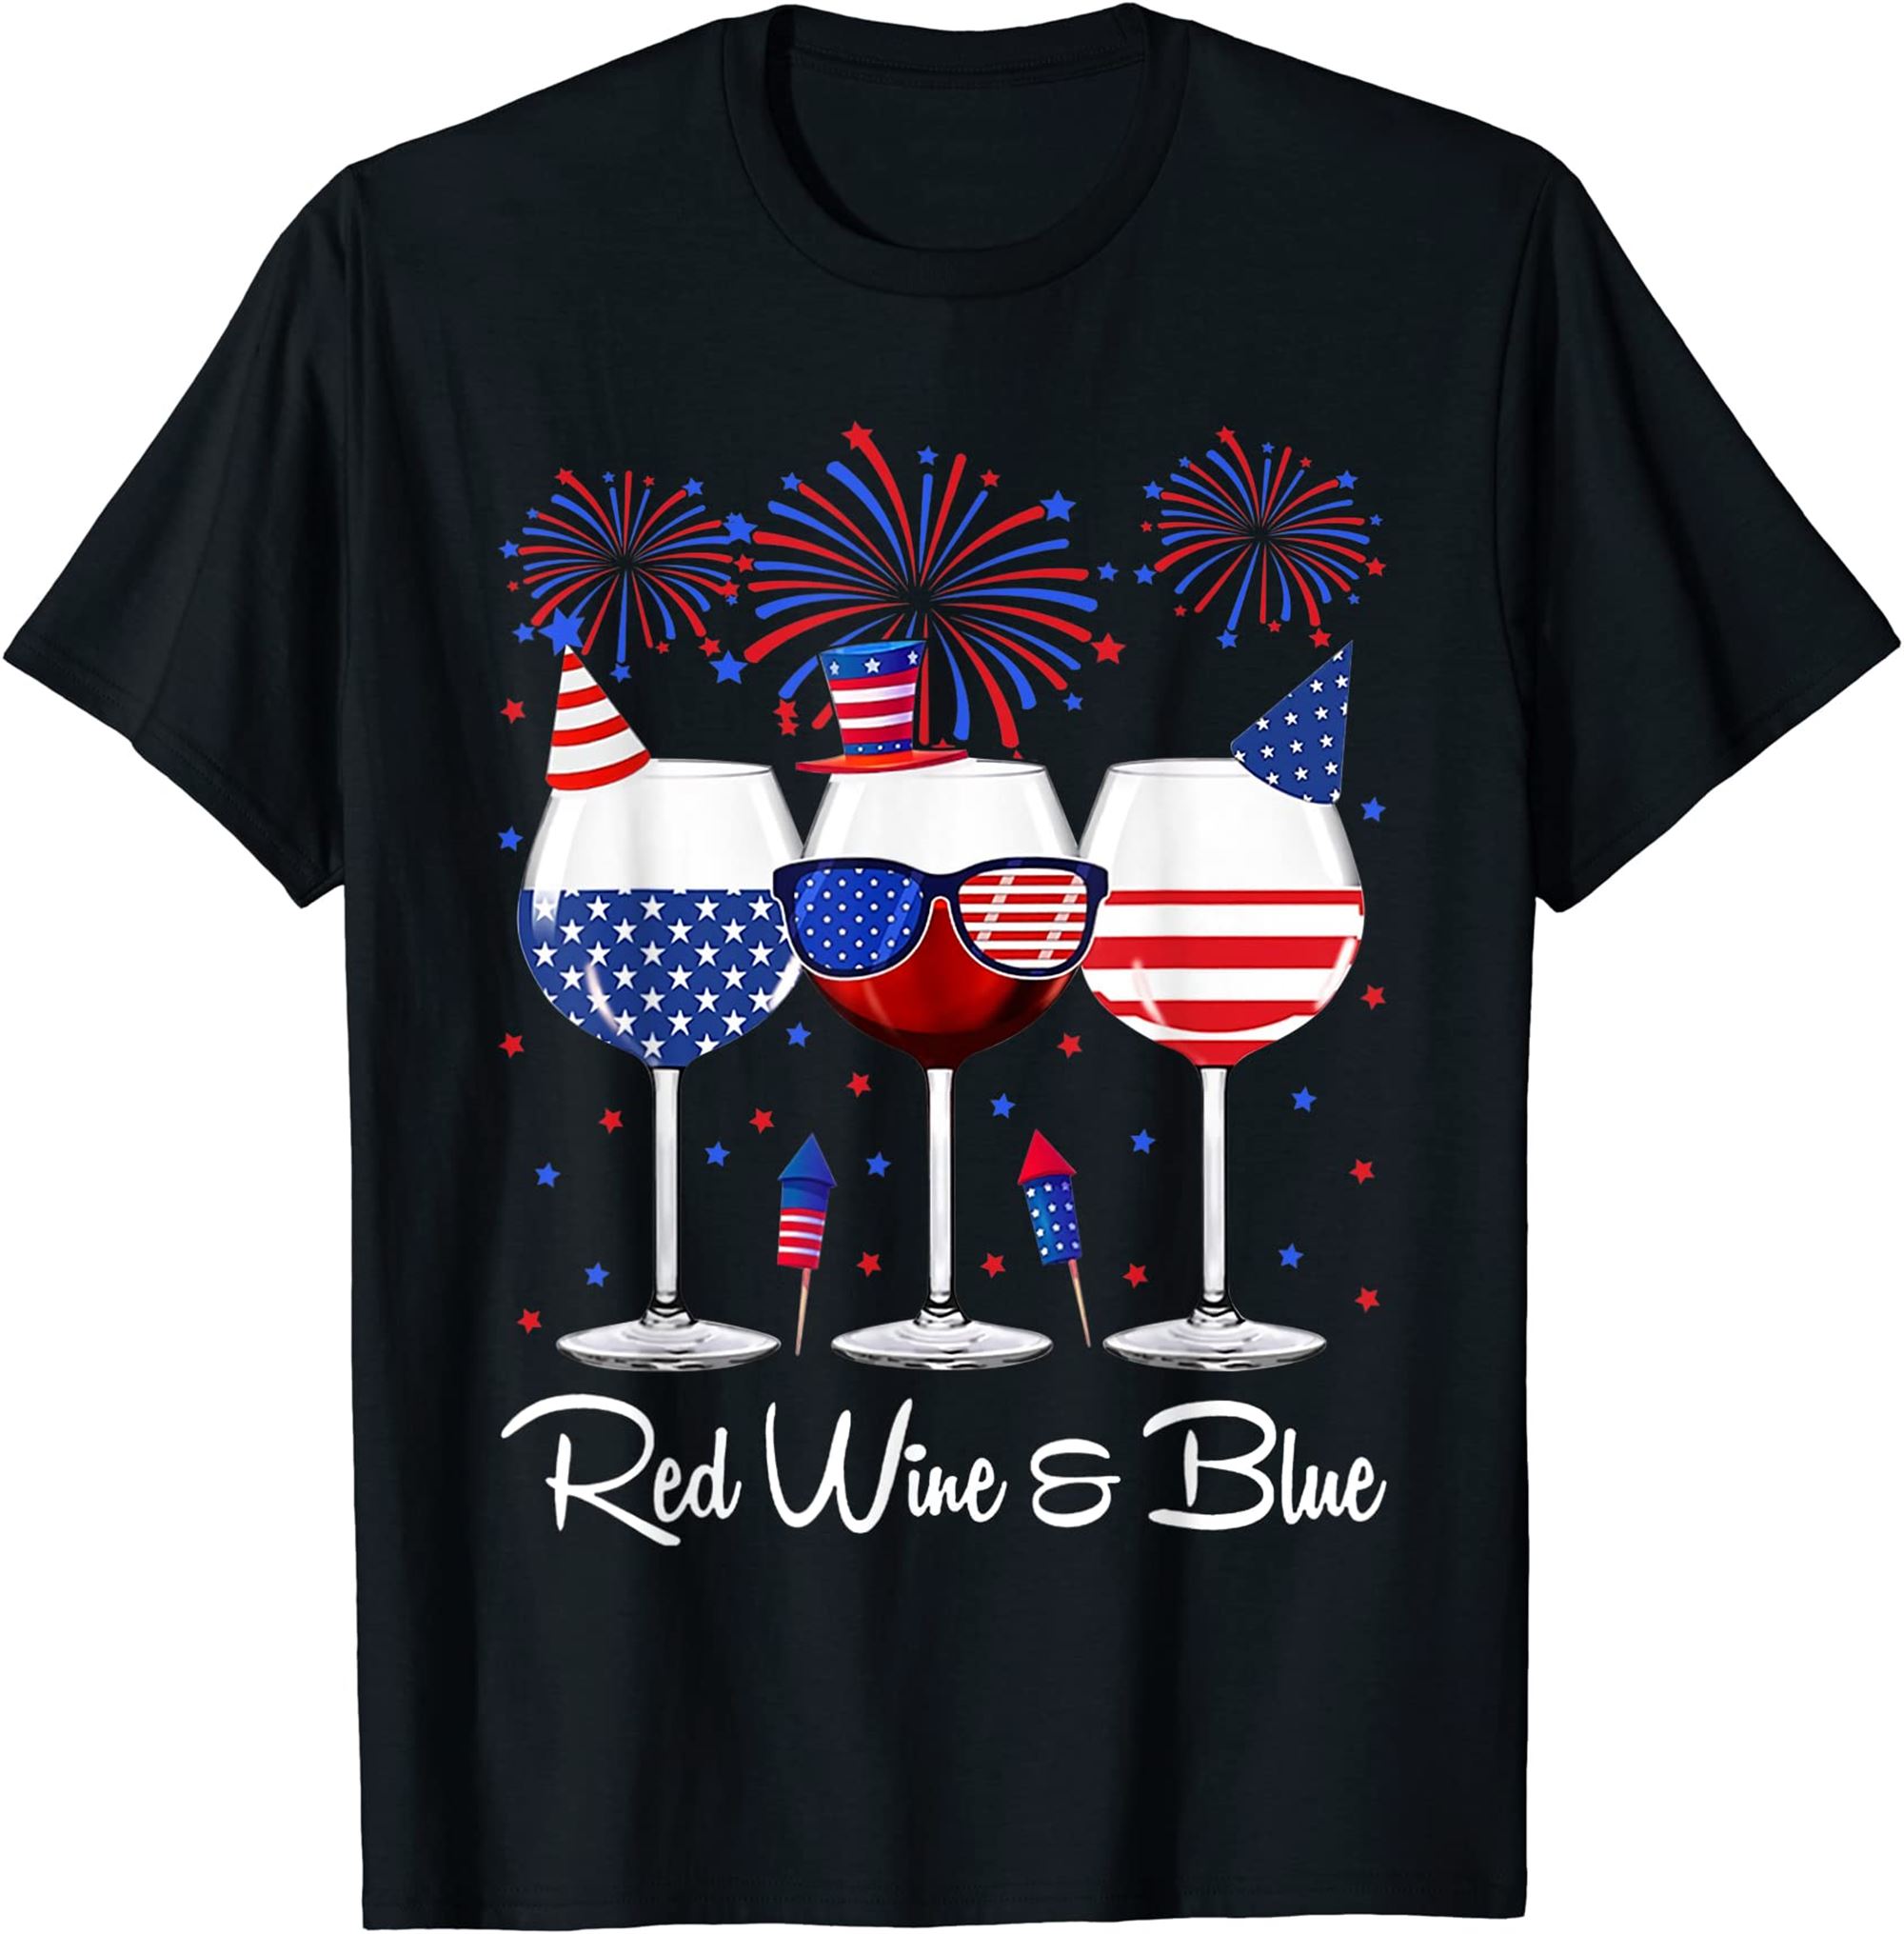 Red Wine Blue 4th Of July Wine Red White Blue Wine Glasses T-shirt Size Up To 5xl